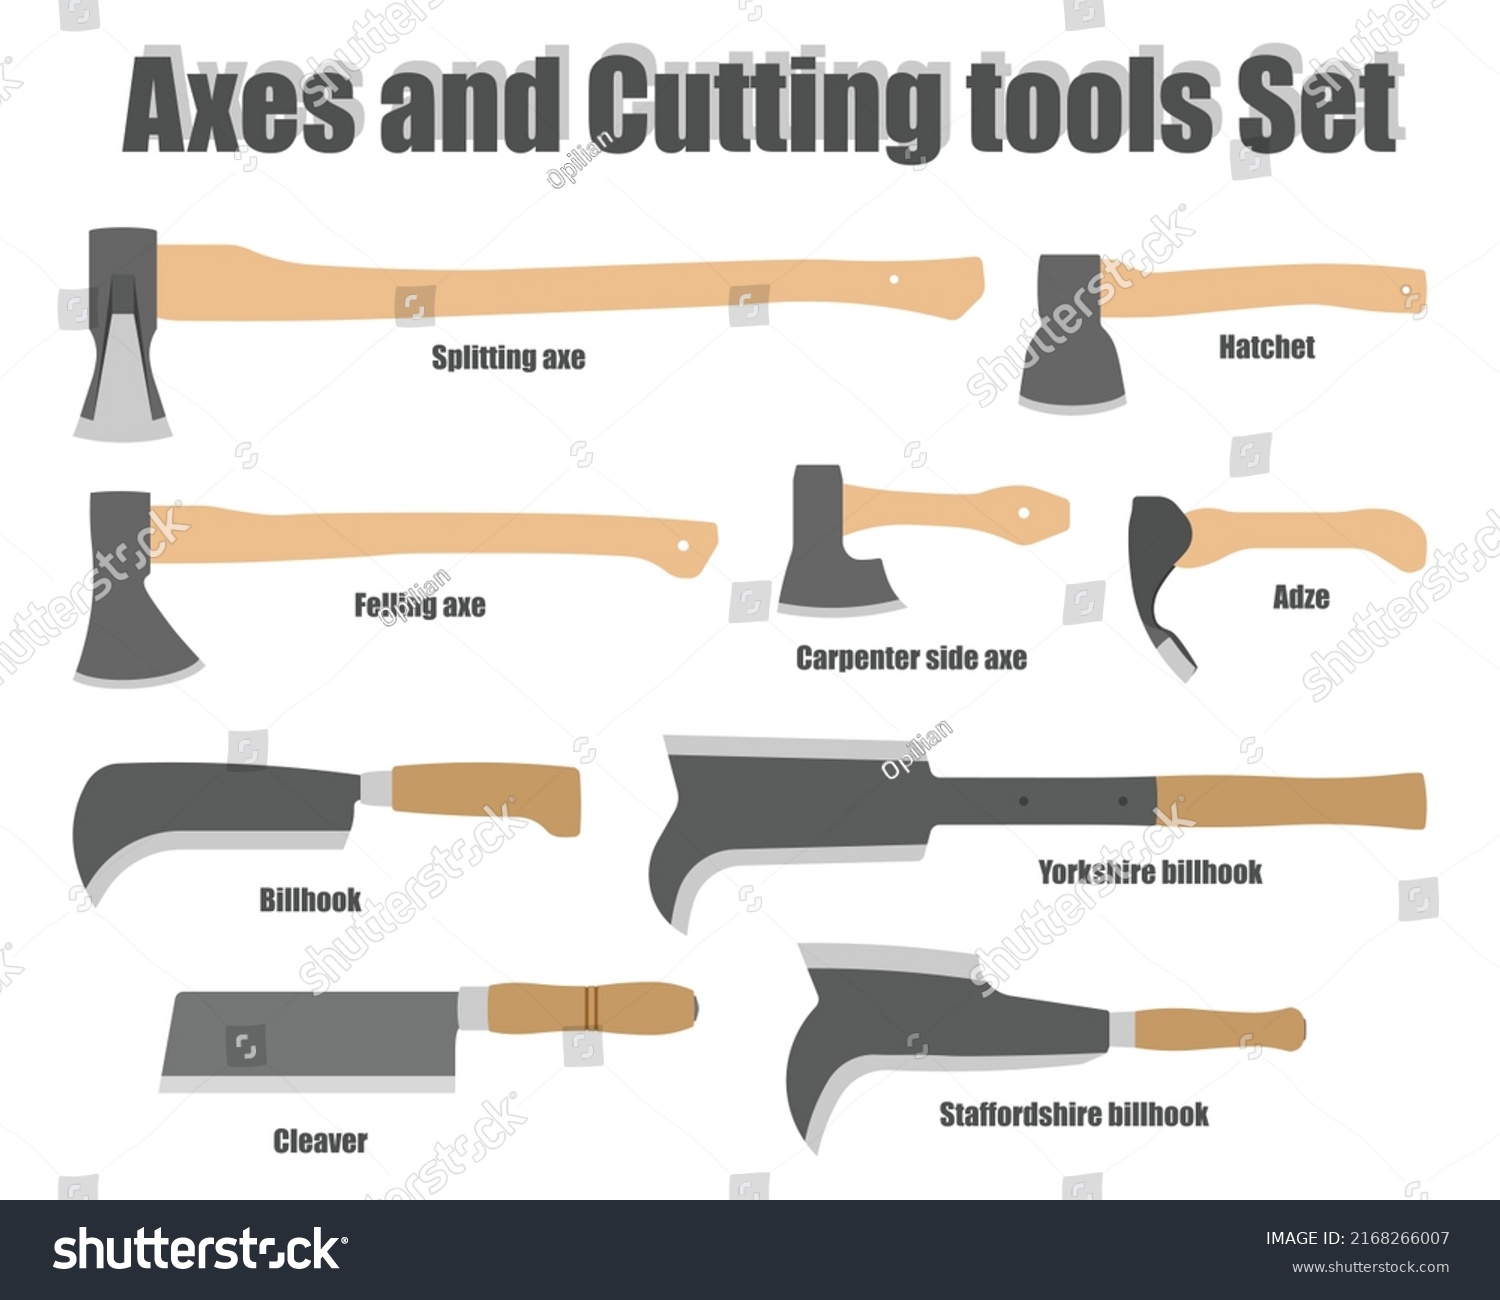 SVG of Different types of Axes and Cutting tools set isolated vectors on white background. Consists of Axe Adze Hatchet Billhook and Cleaver. Used for carpenter woodworking forest log. svg